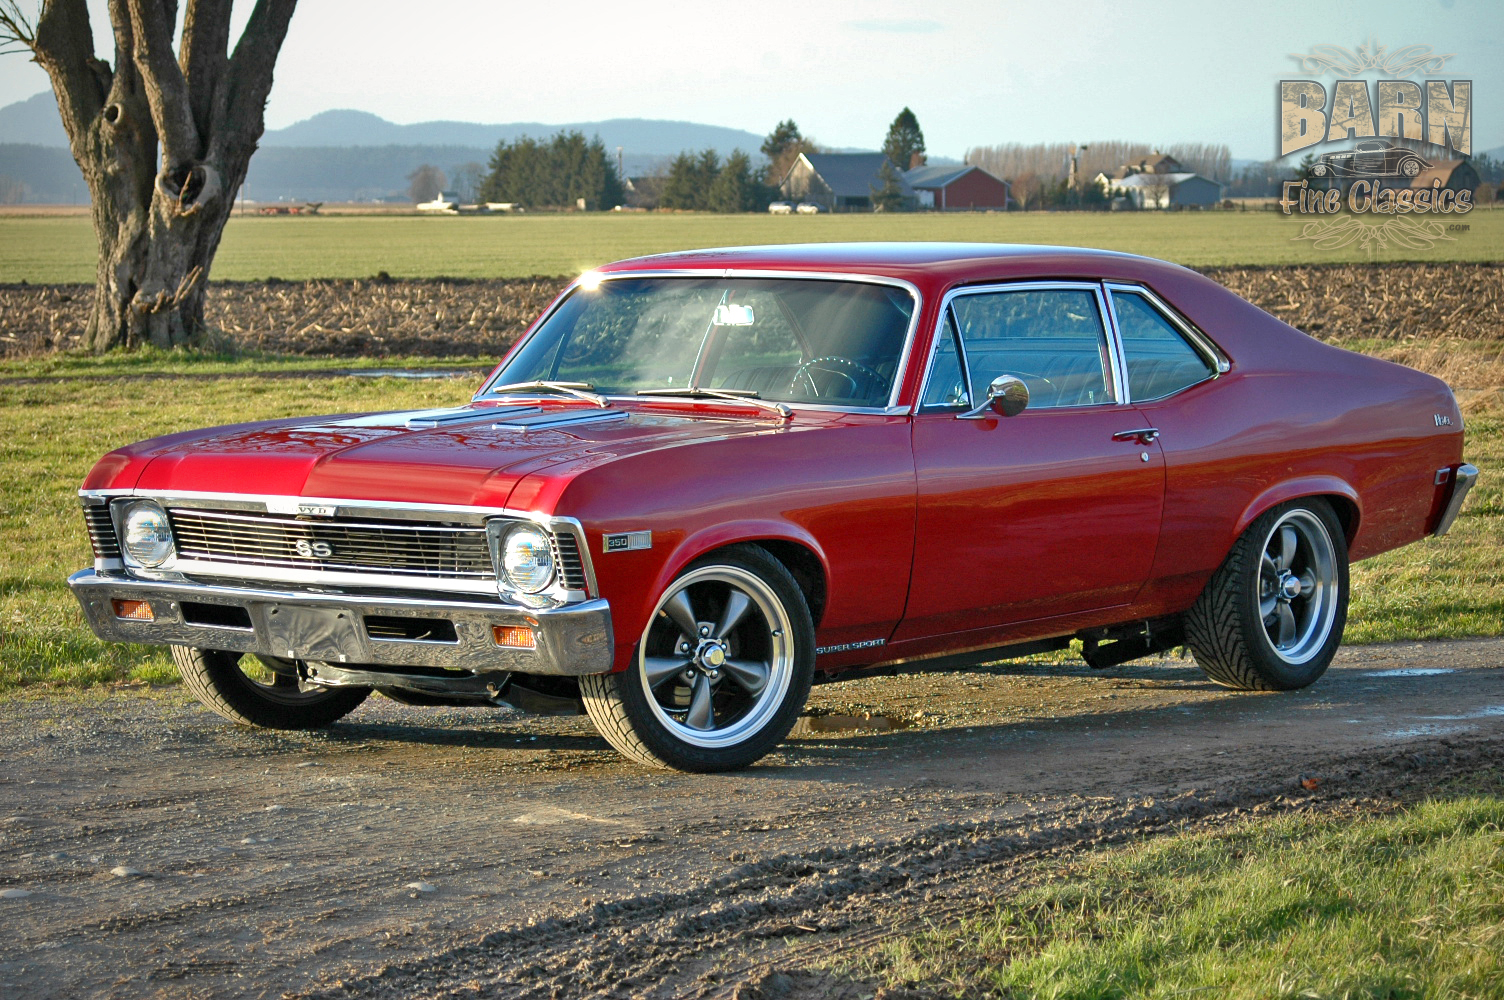 1968 Chevrolet Nova is listed For sale on ClassicDigest in Mount Vernon, WA...